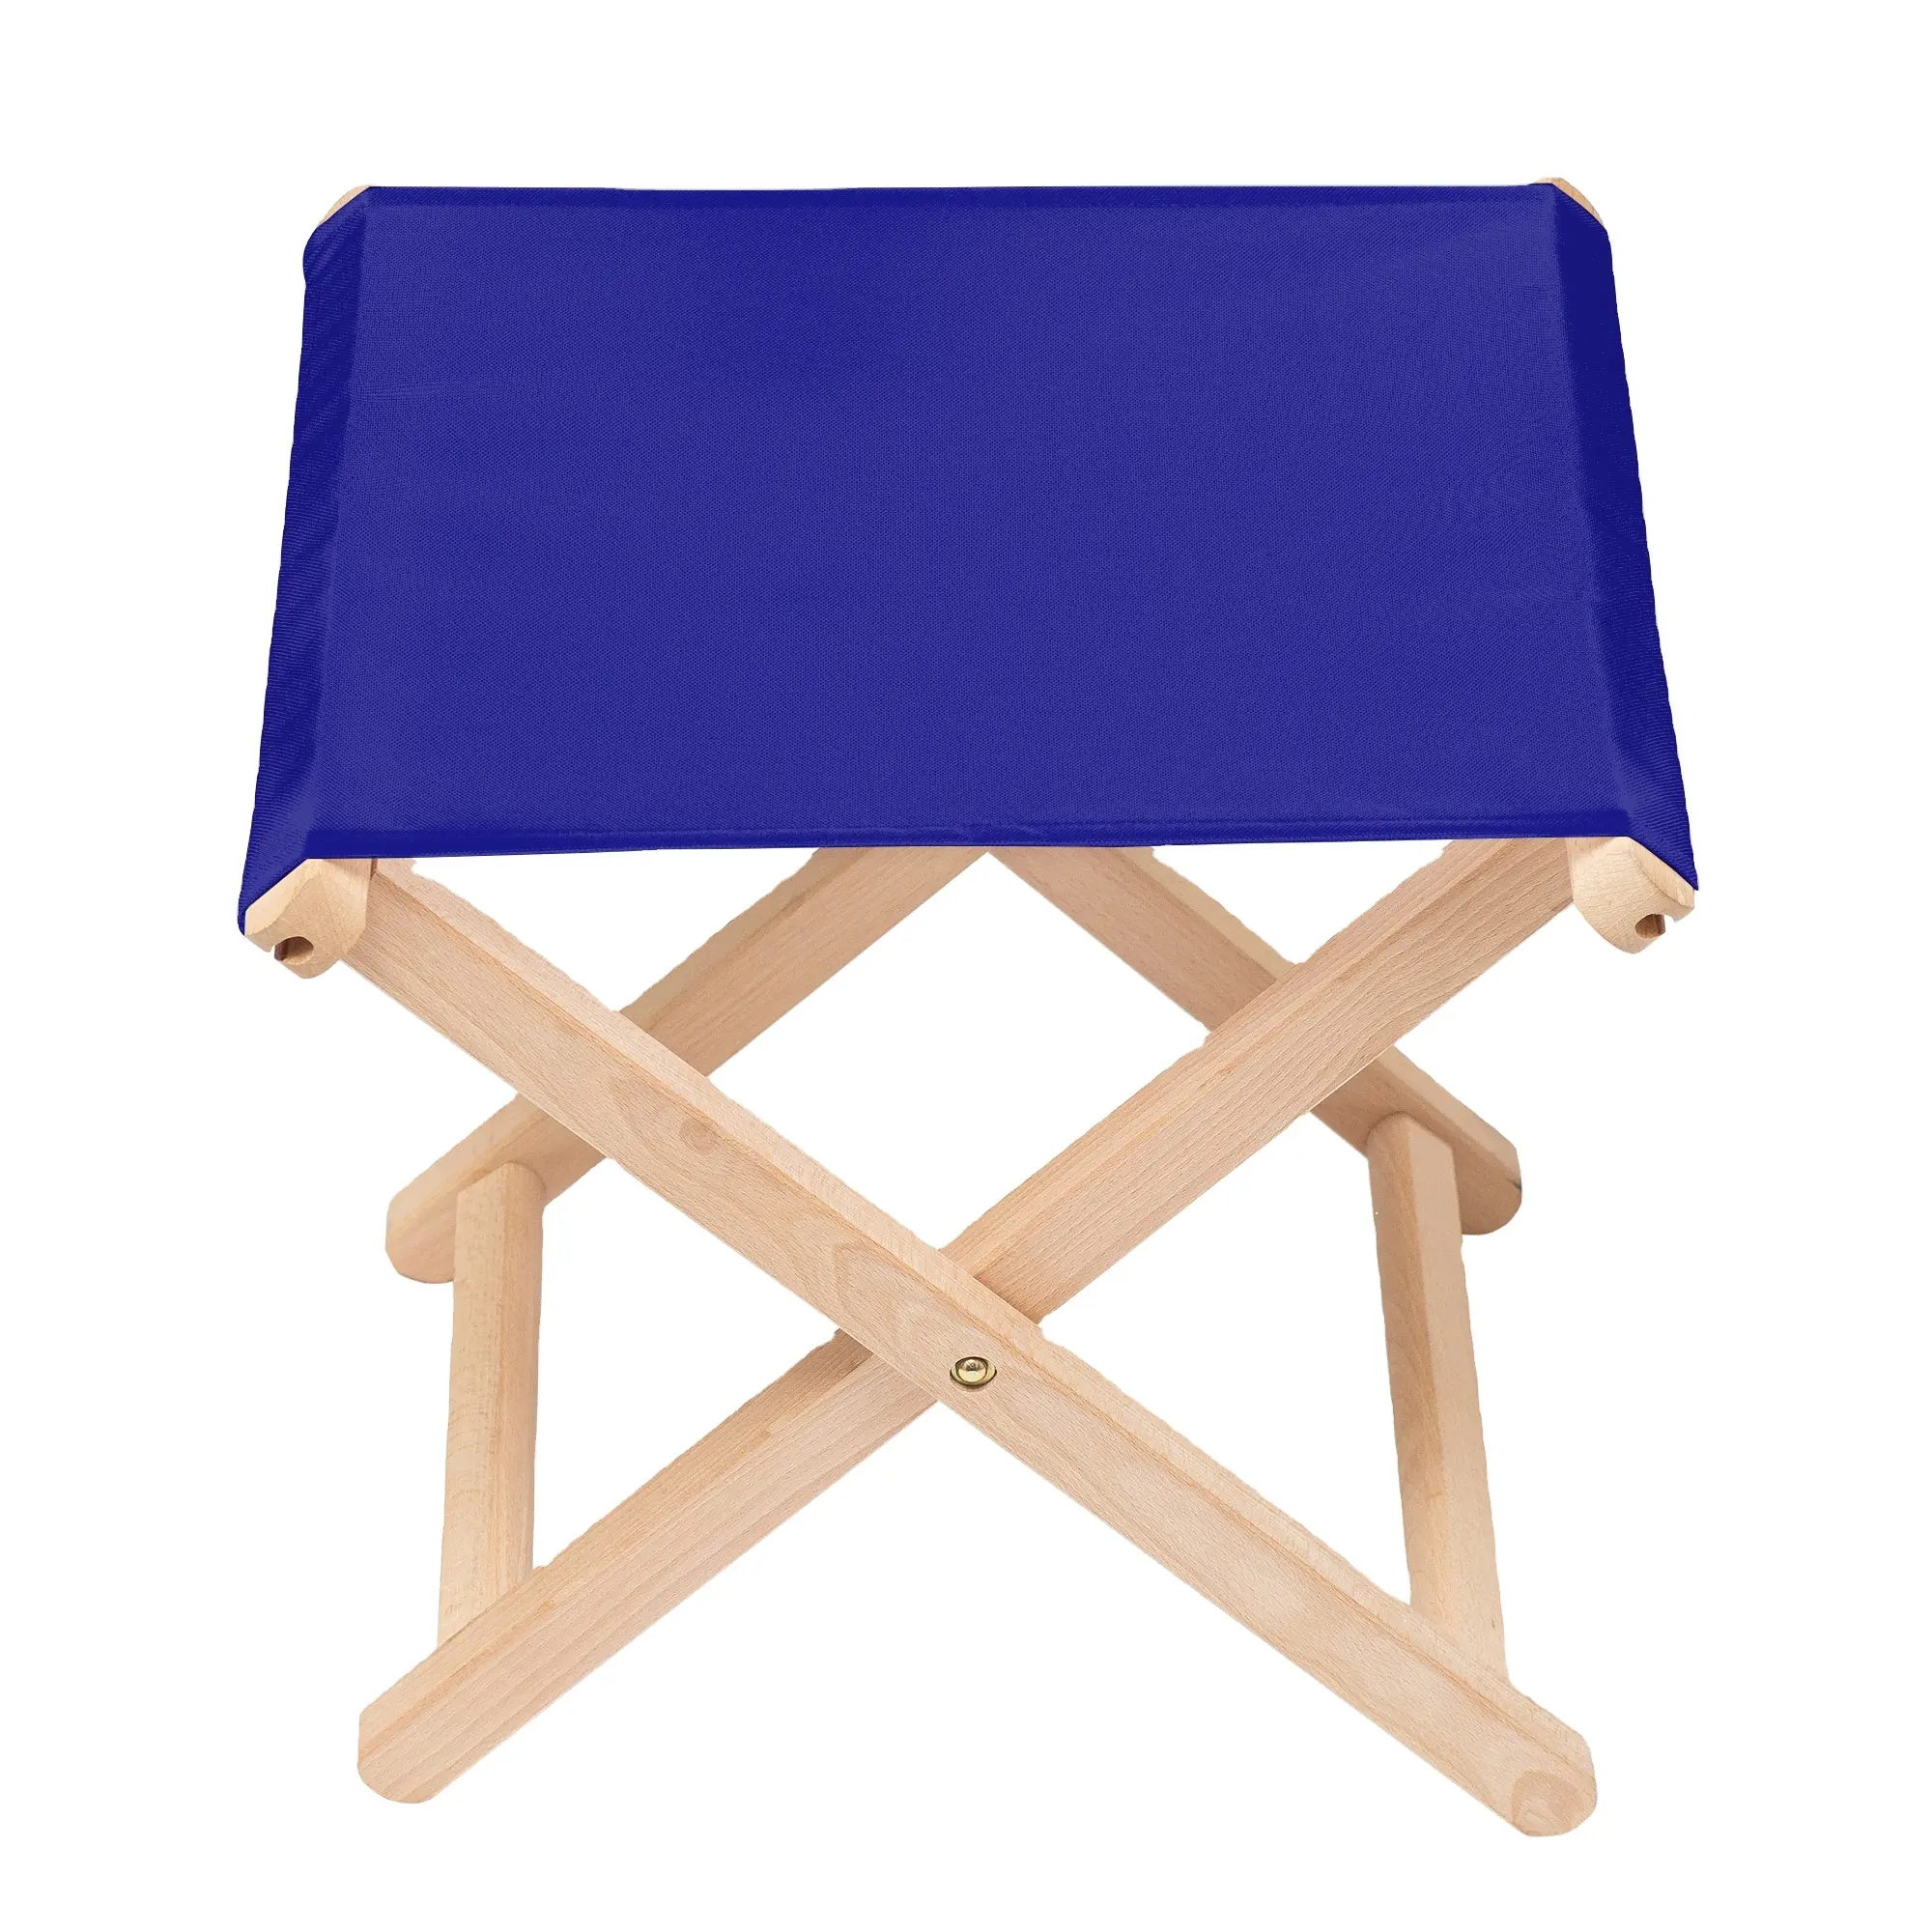 Fabric for a folding stool - Polyester seat for wooden portable outdoor fishing chair - Large selection of colors - High quality